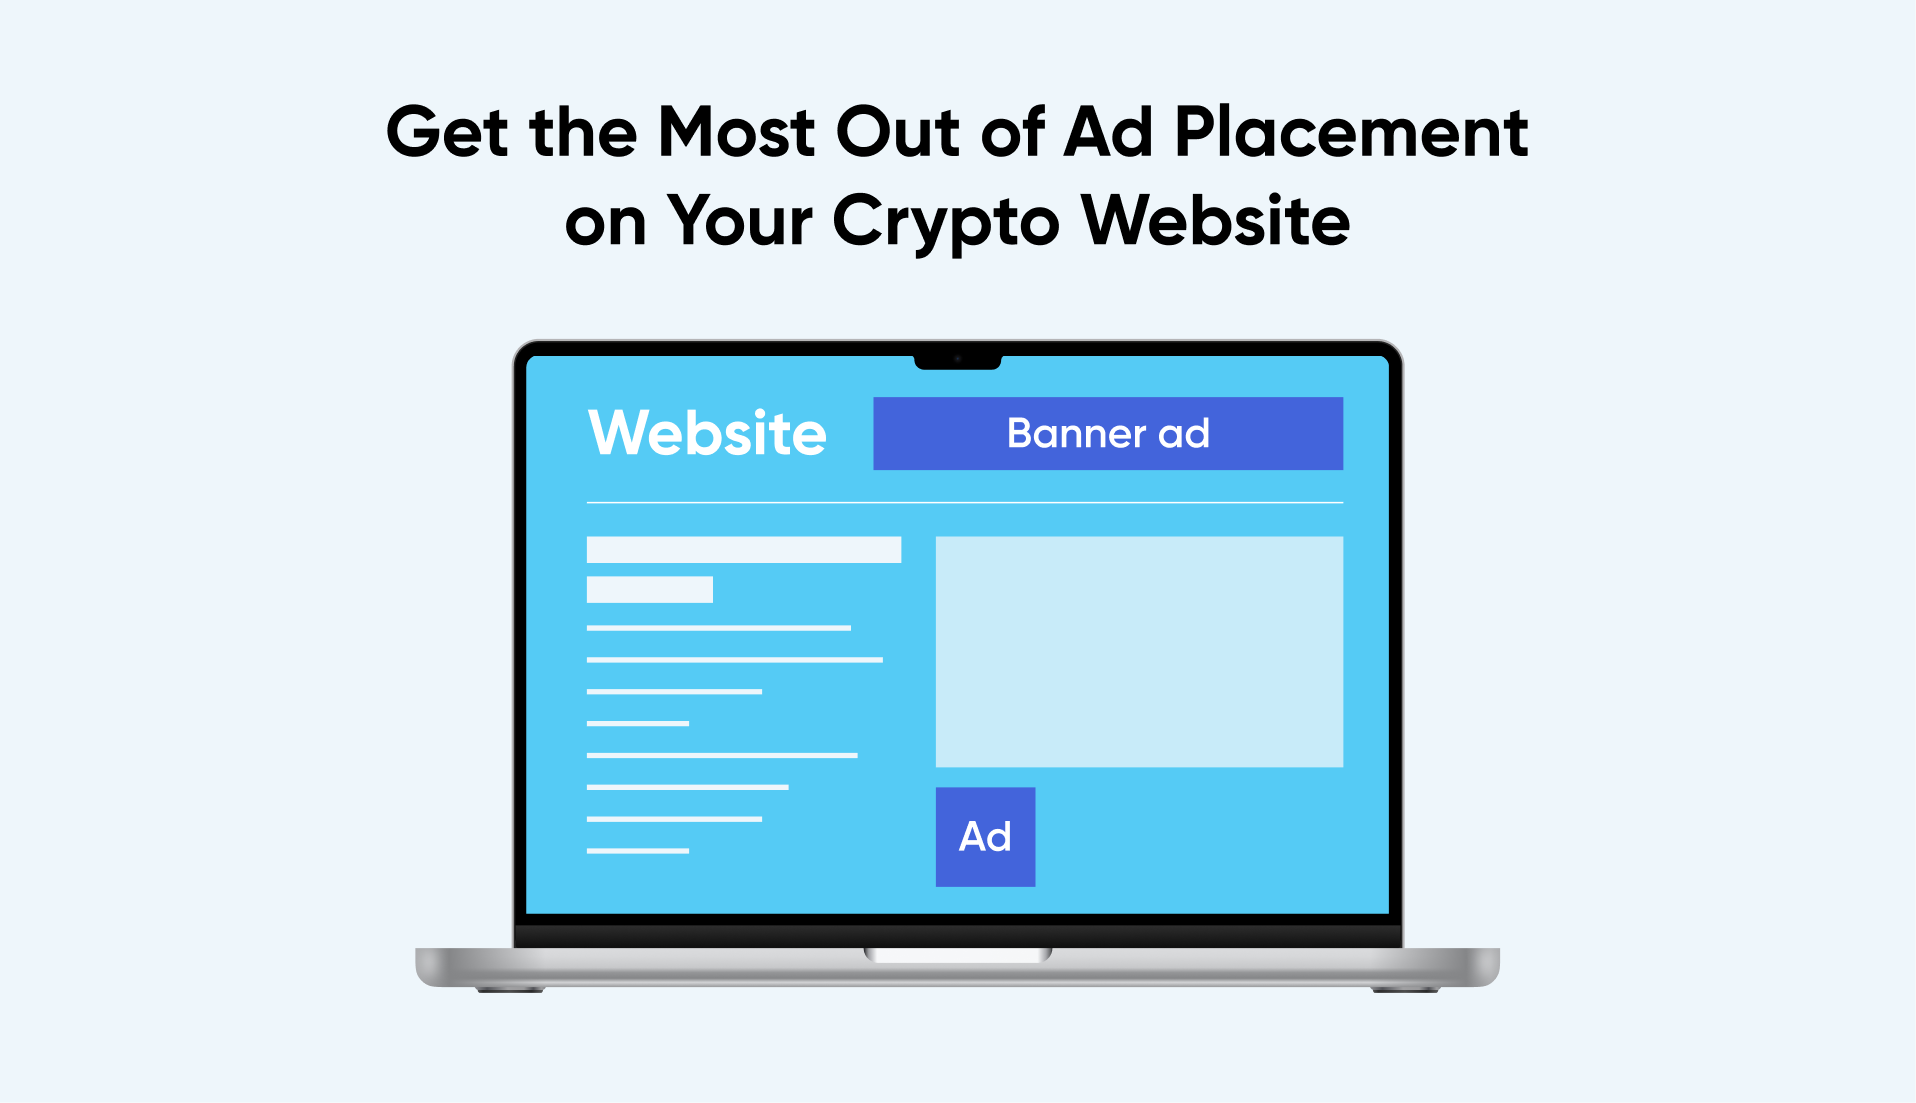 How to Get the Most Out of Ad Placement on a Crypto Website!